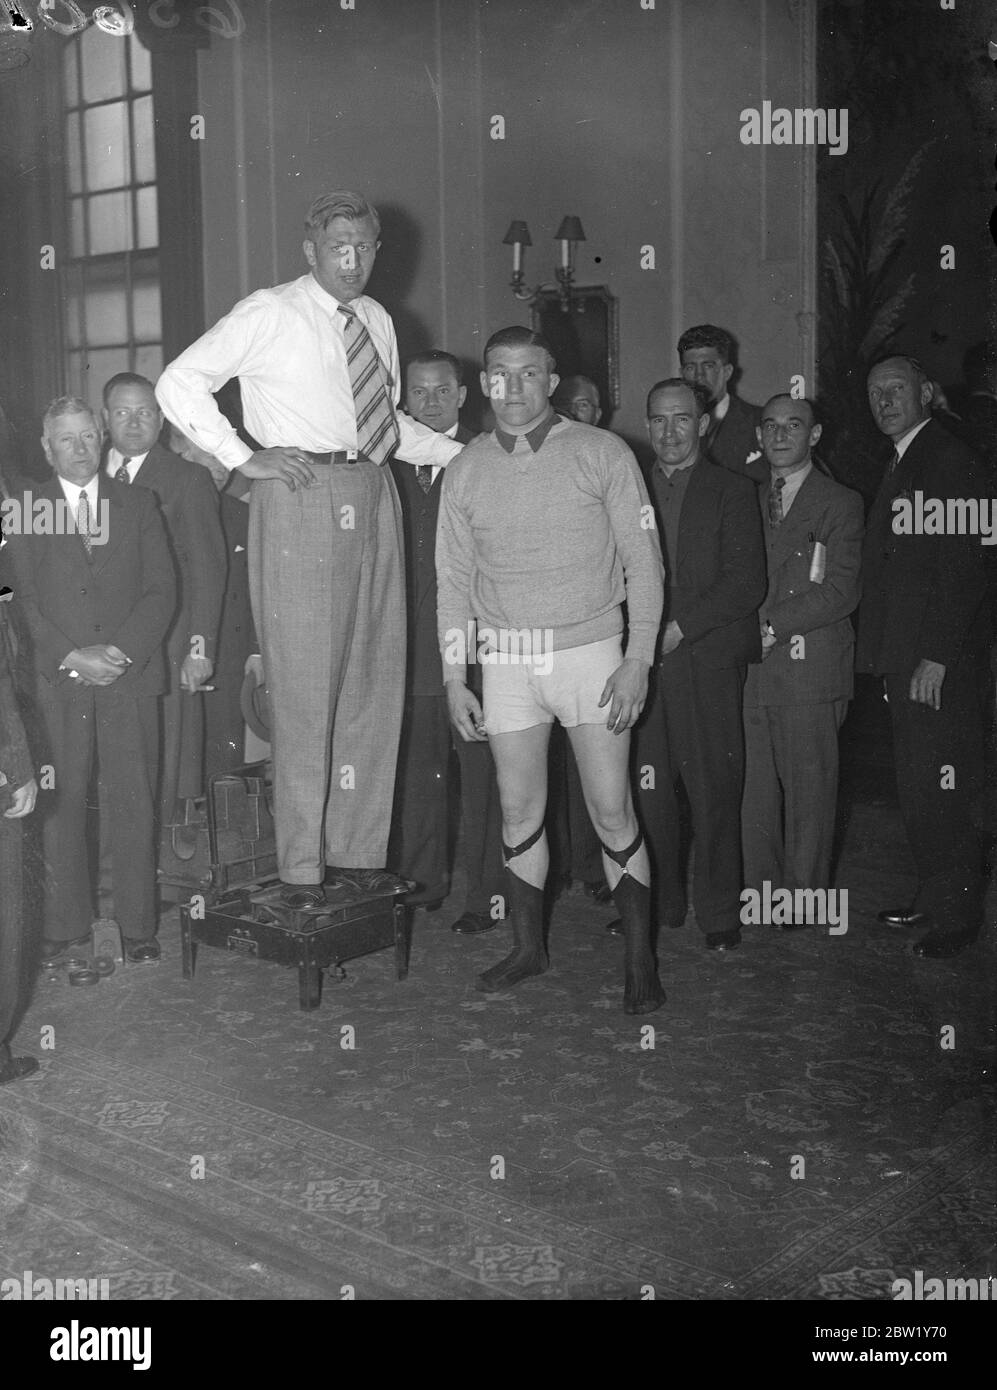 Neusel and Farr weigh-in at Stadium Club. Walter Neusel, the German heavyweight and Tommy Farr, conqueror of Max Baer, weighed in at the Stadium Club, Holborn, for their fight at Harringay tonight (Tuesday). Photo shows: Walter Neusel (on the scales) and Tommy Farr at the weigh-in. 15 June 1937 Stock Photo